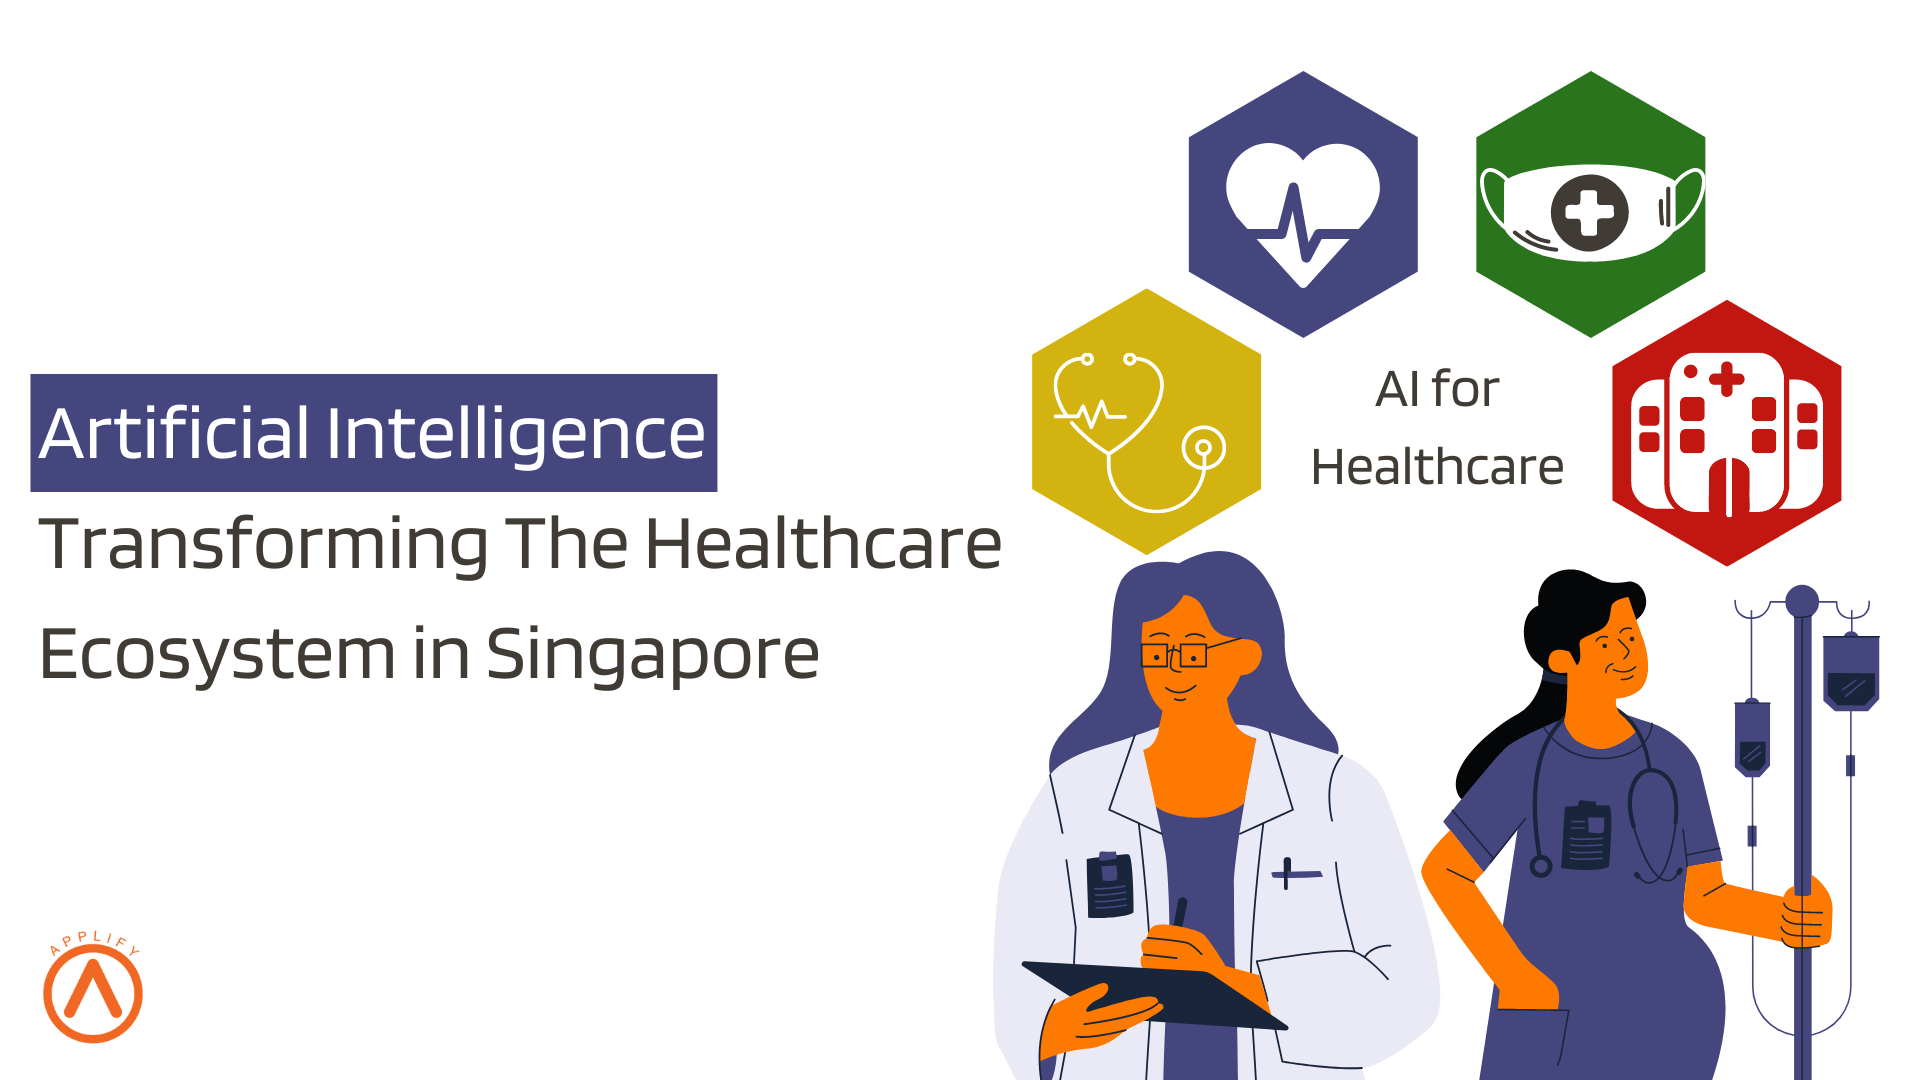 Artificial Intelligence Transforming The Healthcare Ecosystem in Singapore